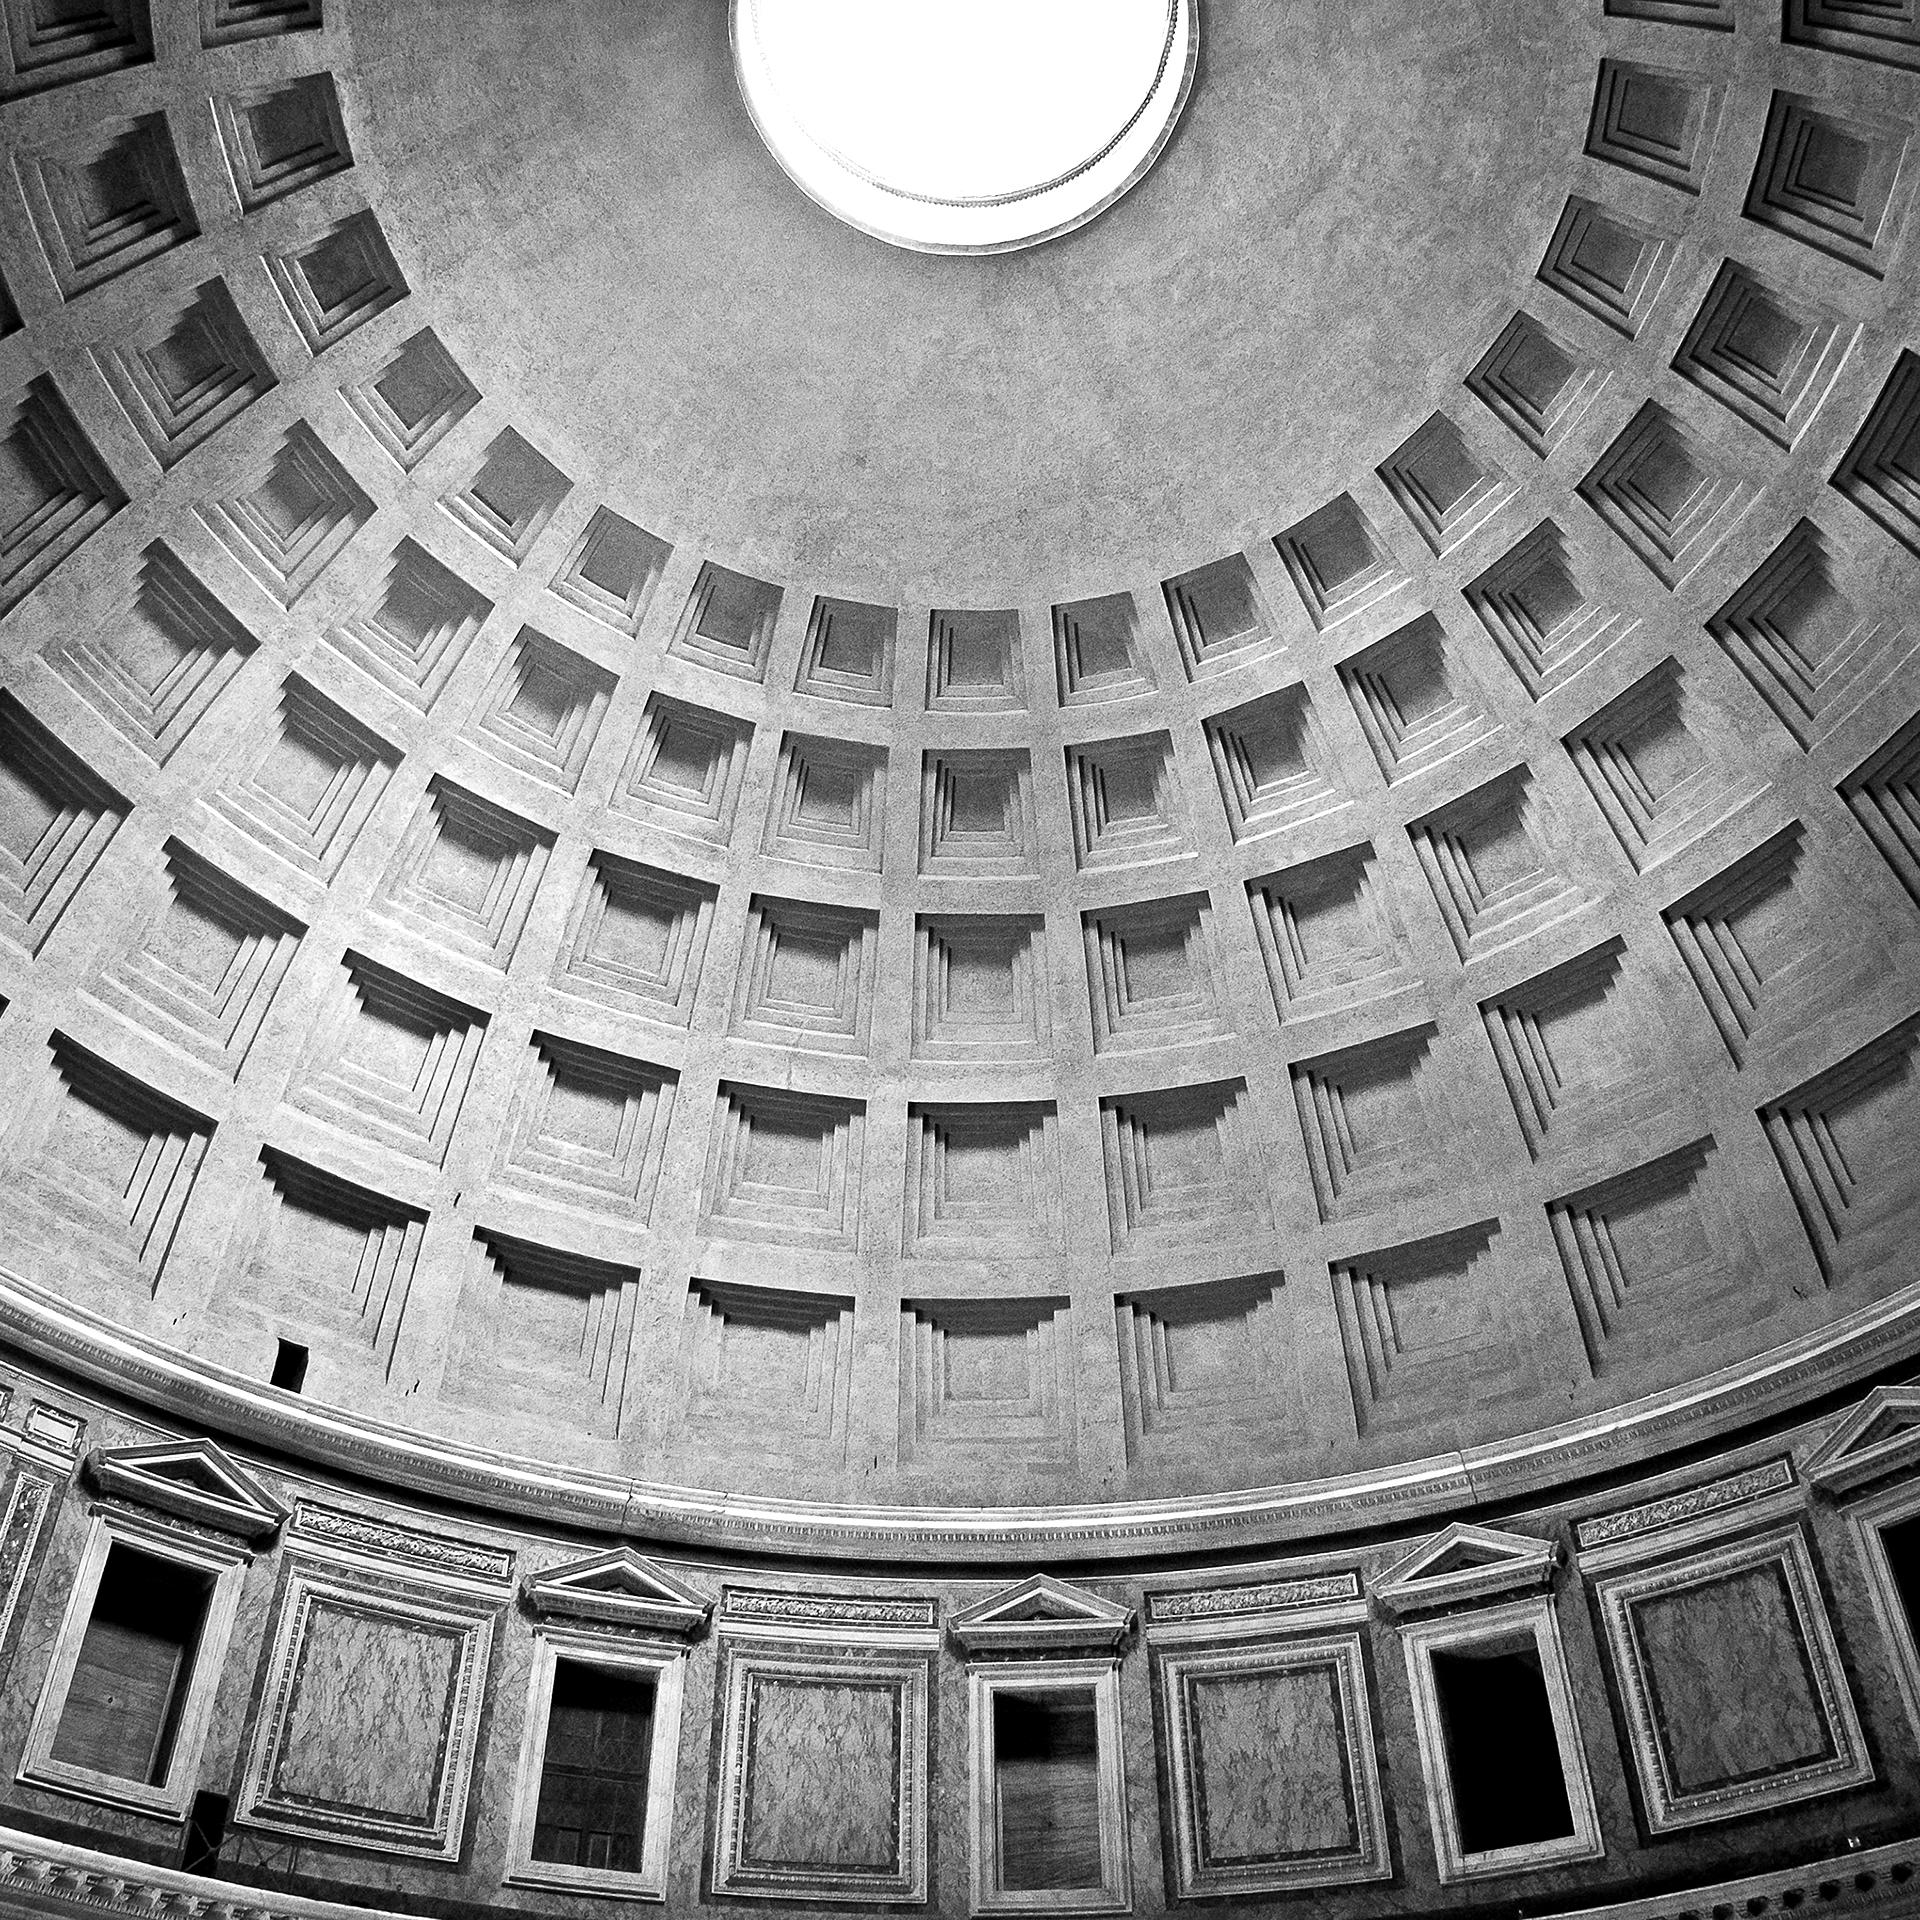 PANTHEON #02 - collection: "Armony and Perfection" - Alberto Desirò
A sanctuary for all Gods, each equal to the other, of equal importance.
A temple shaped like the Earth and the stars sphere.
Like the Earth where all seeds of the eternal fire are